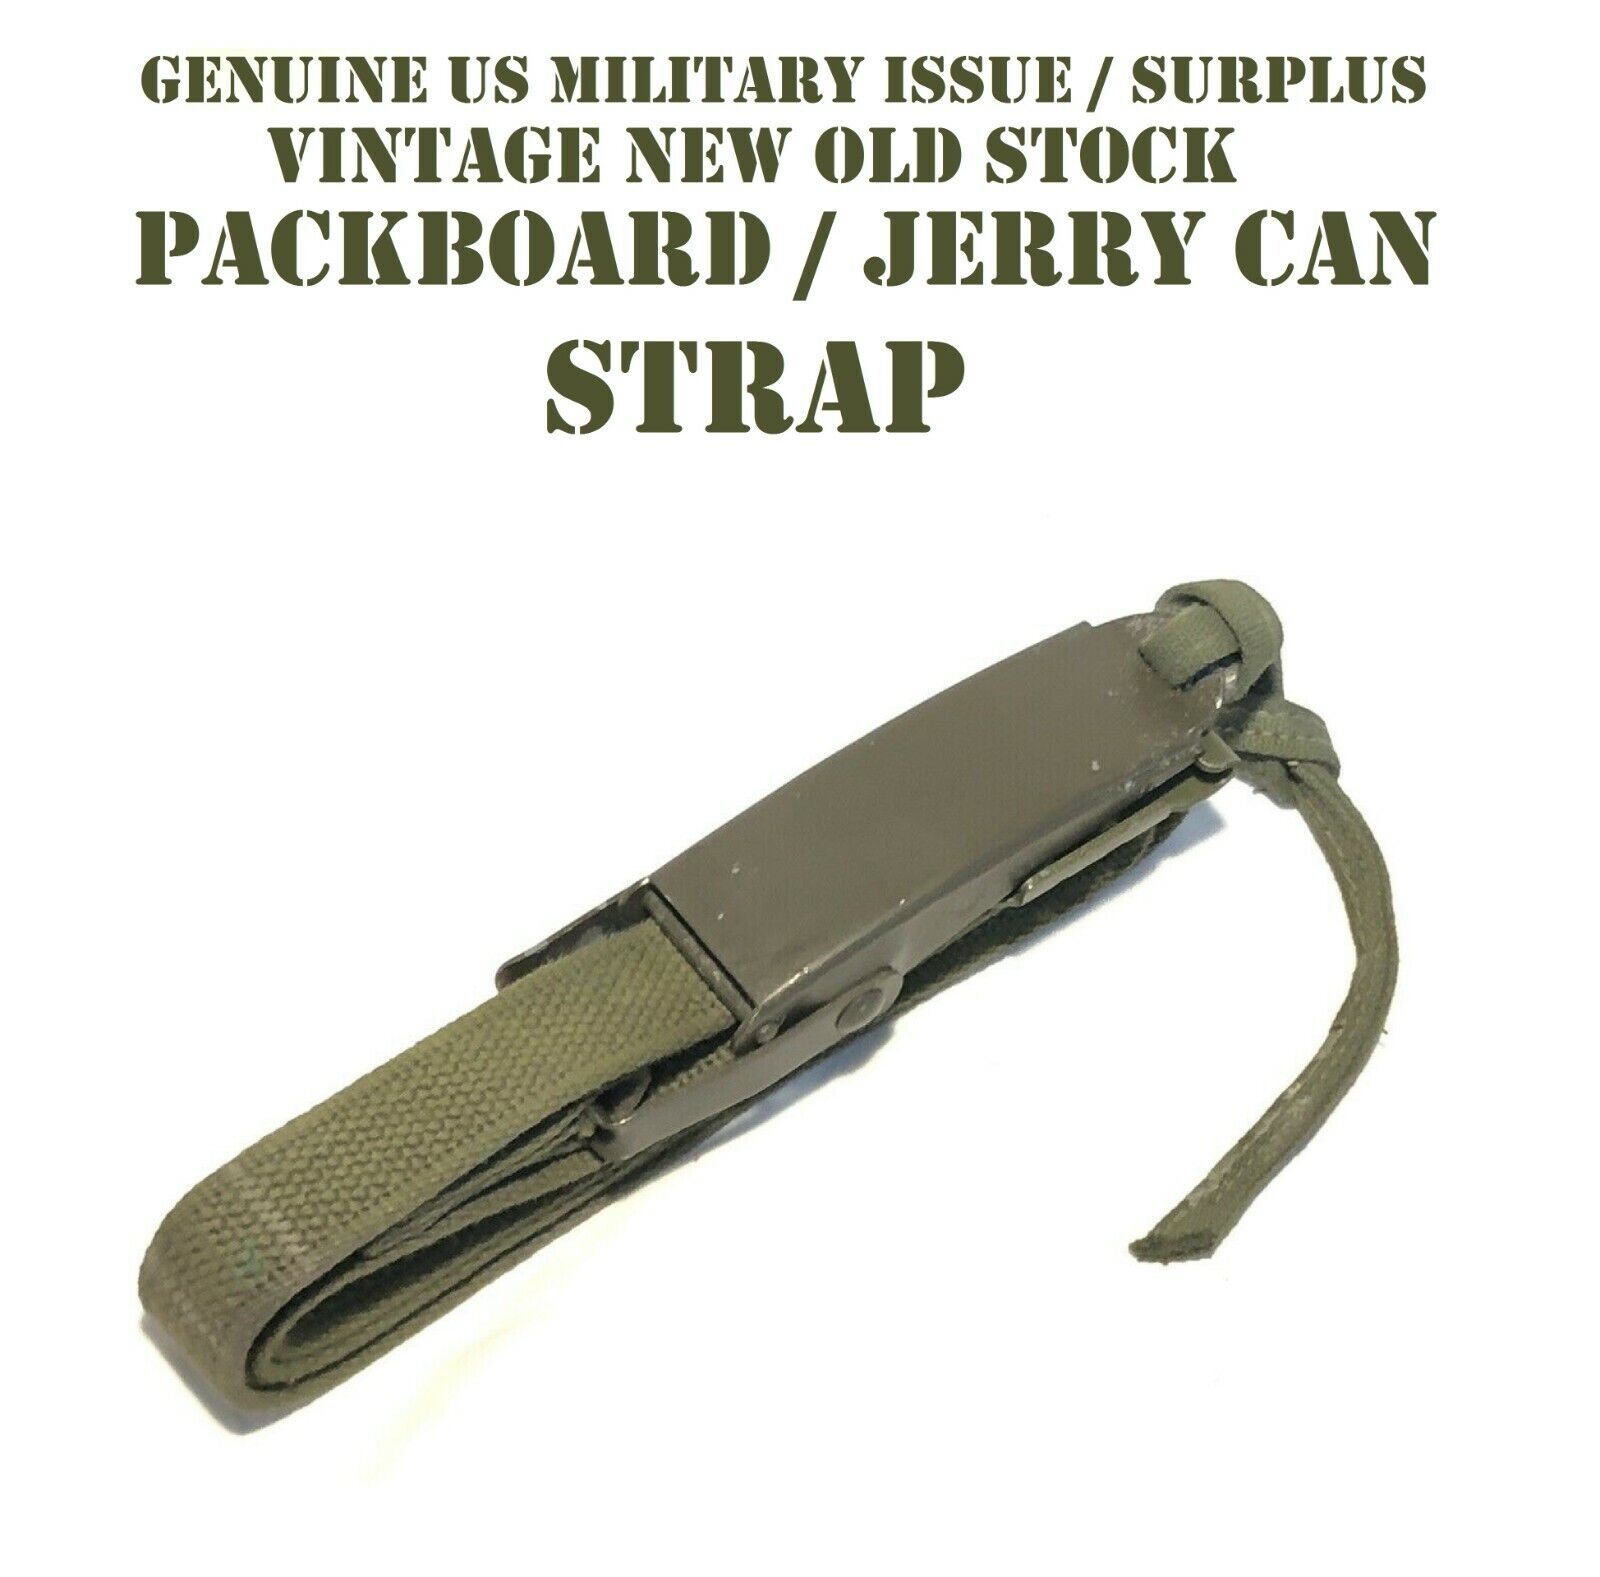 US MILITARY PACKBOARD TIE DOWN STRAP GWP M38 CANVAS WEBBING JERRY CAN GAS JEEP